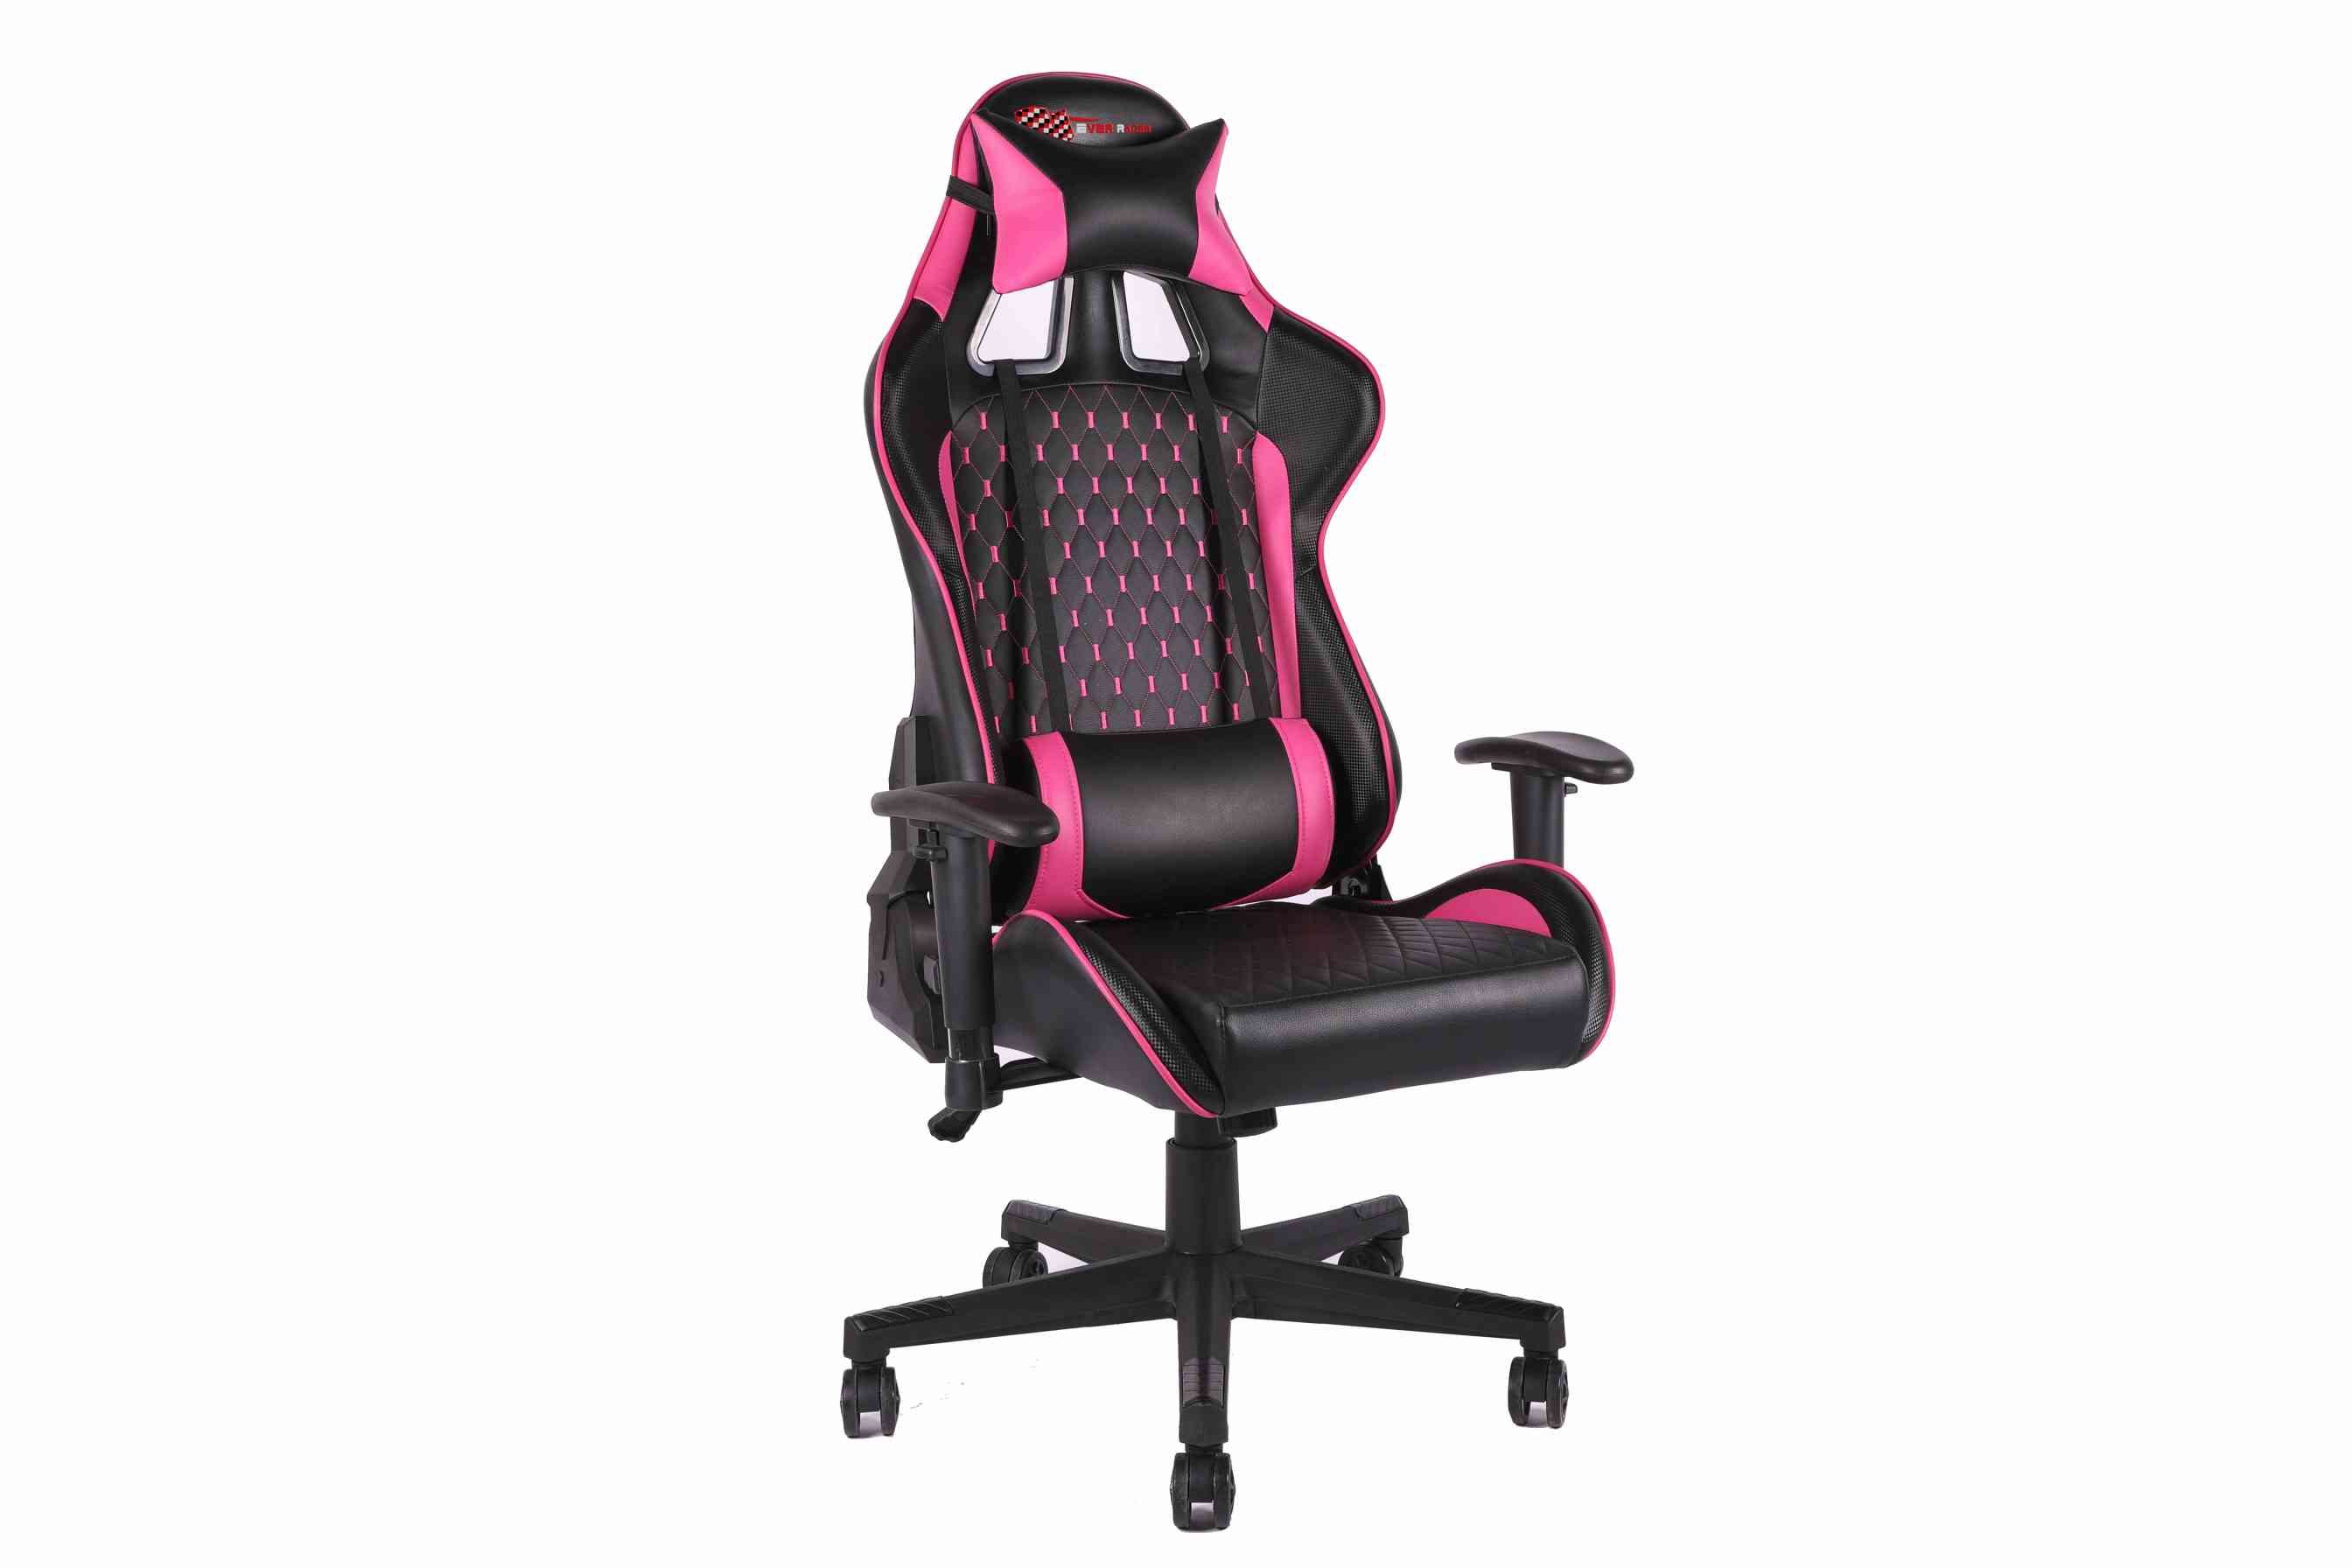 New EverRacer Gaming Office Chair PU Leather Black & Pink